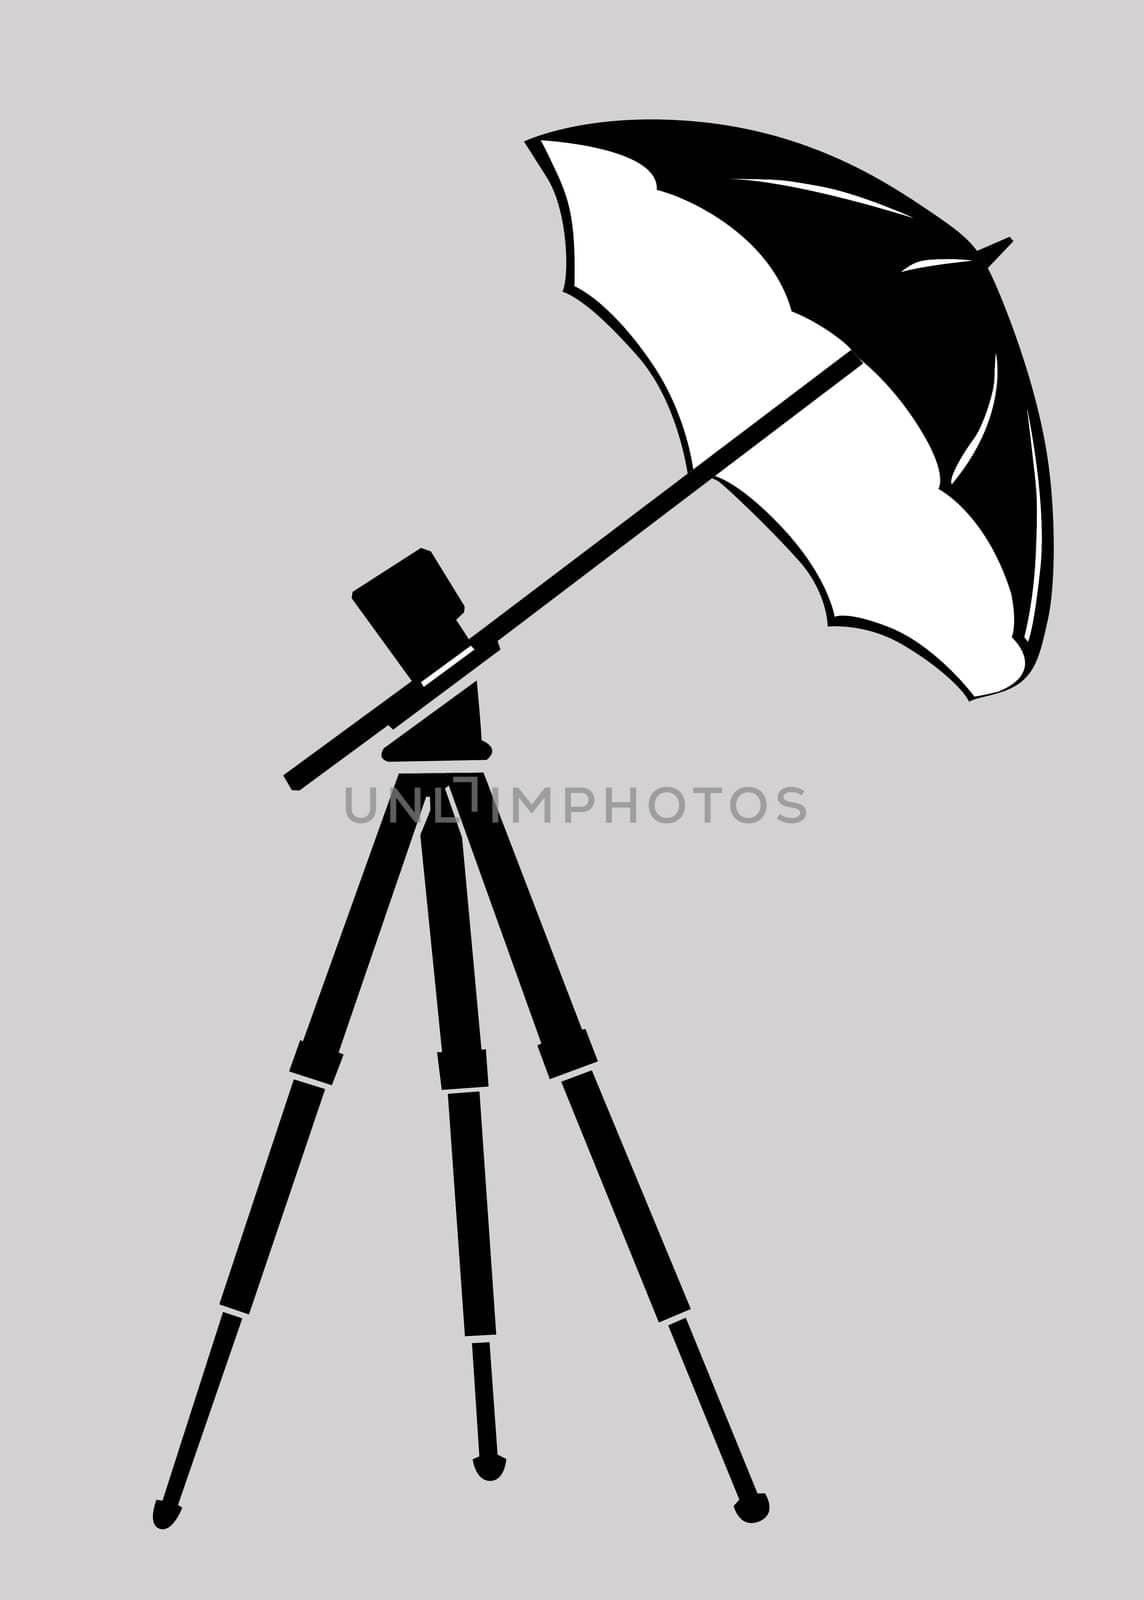 tripod silhouette on gray background, vector illustration by basel101658